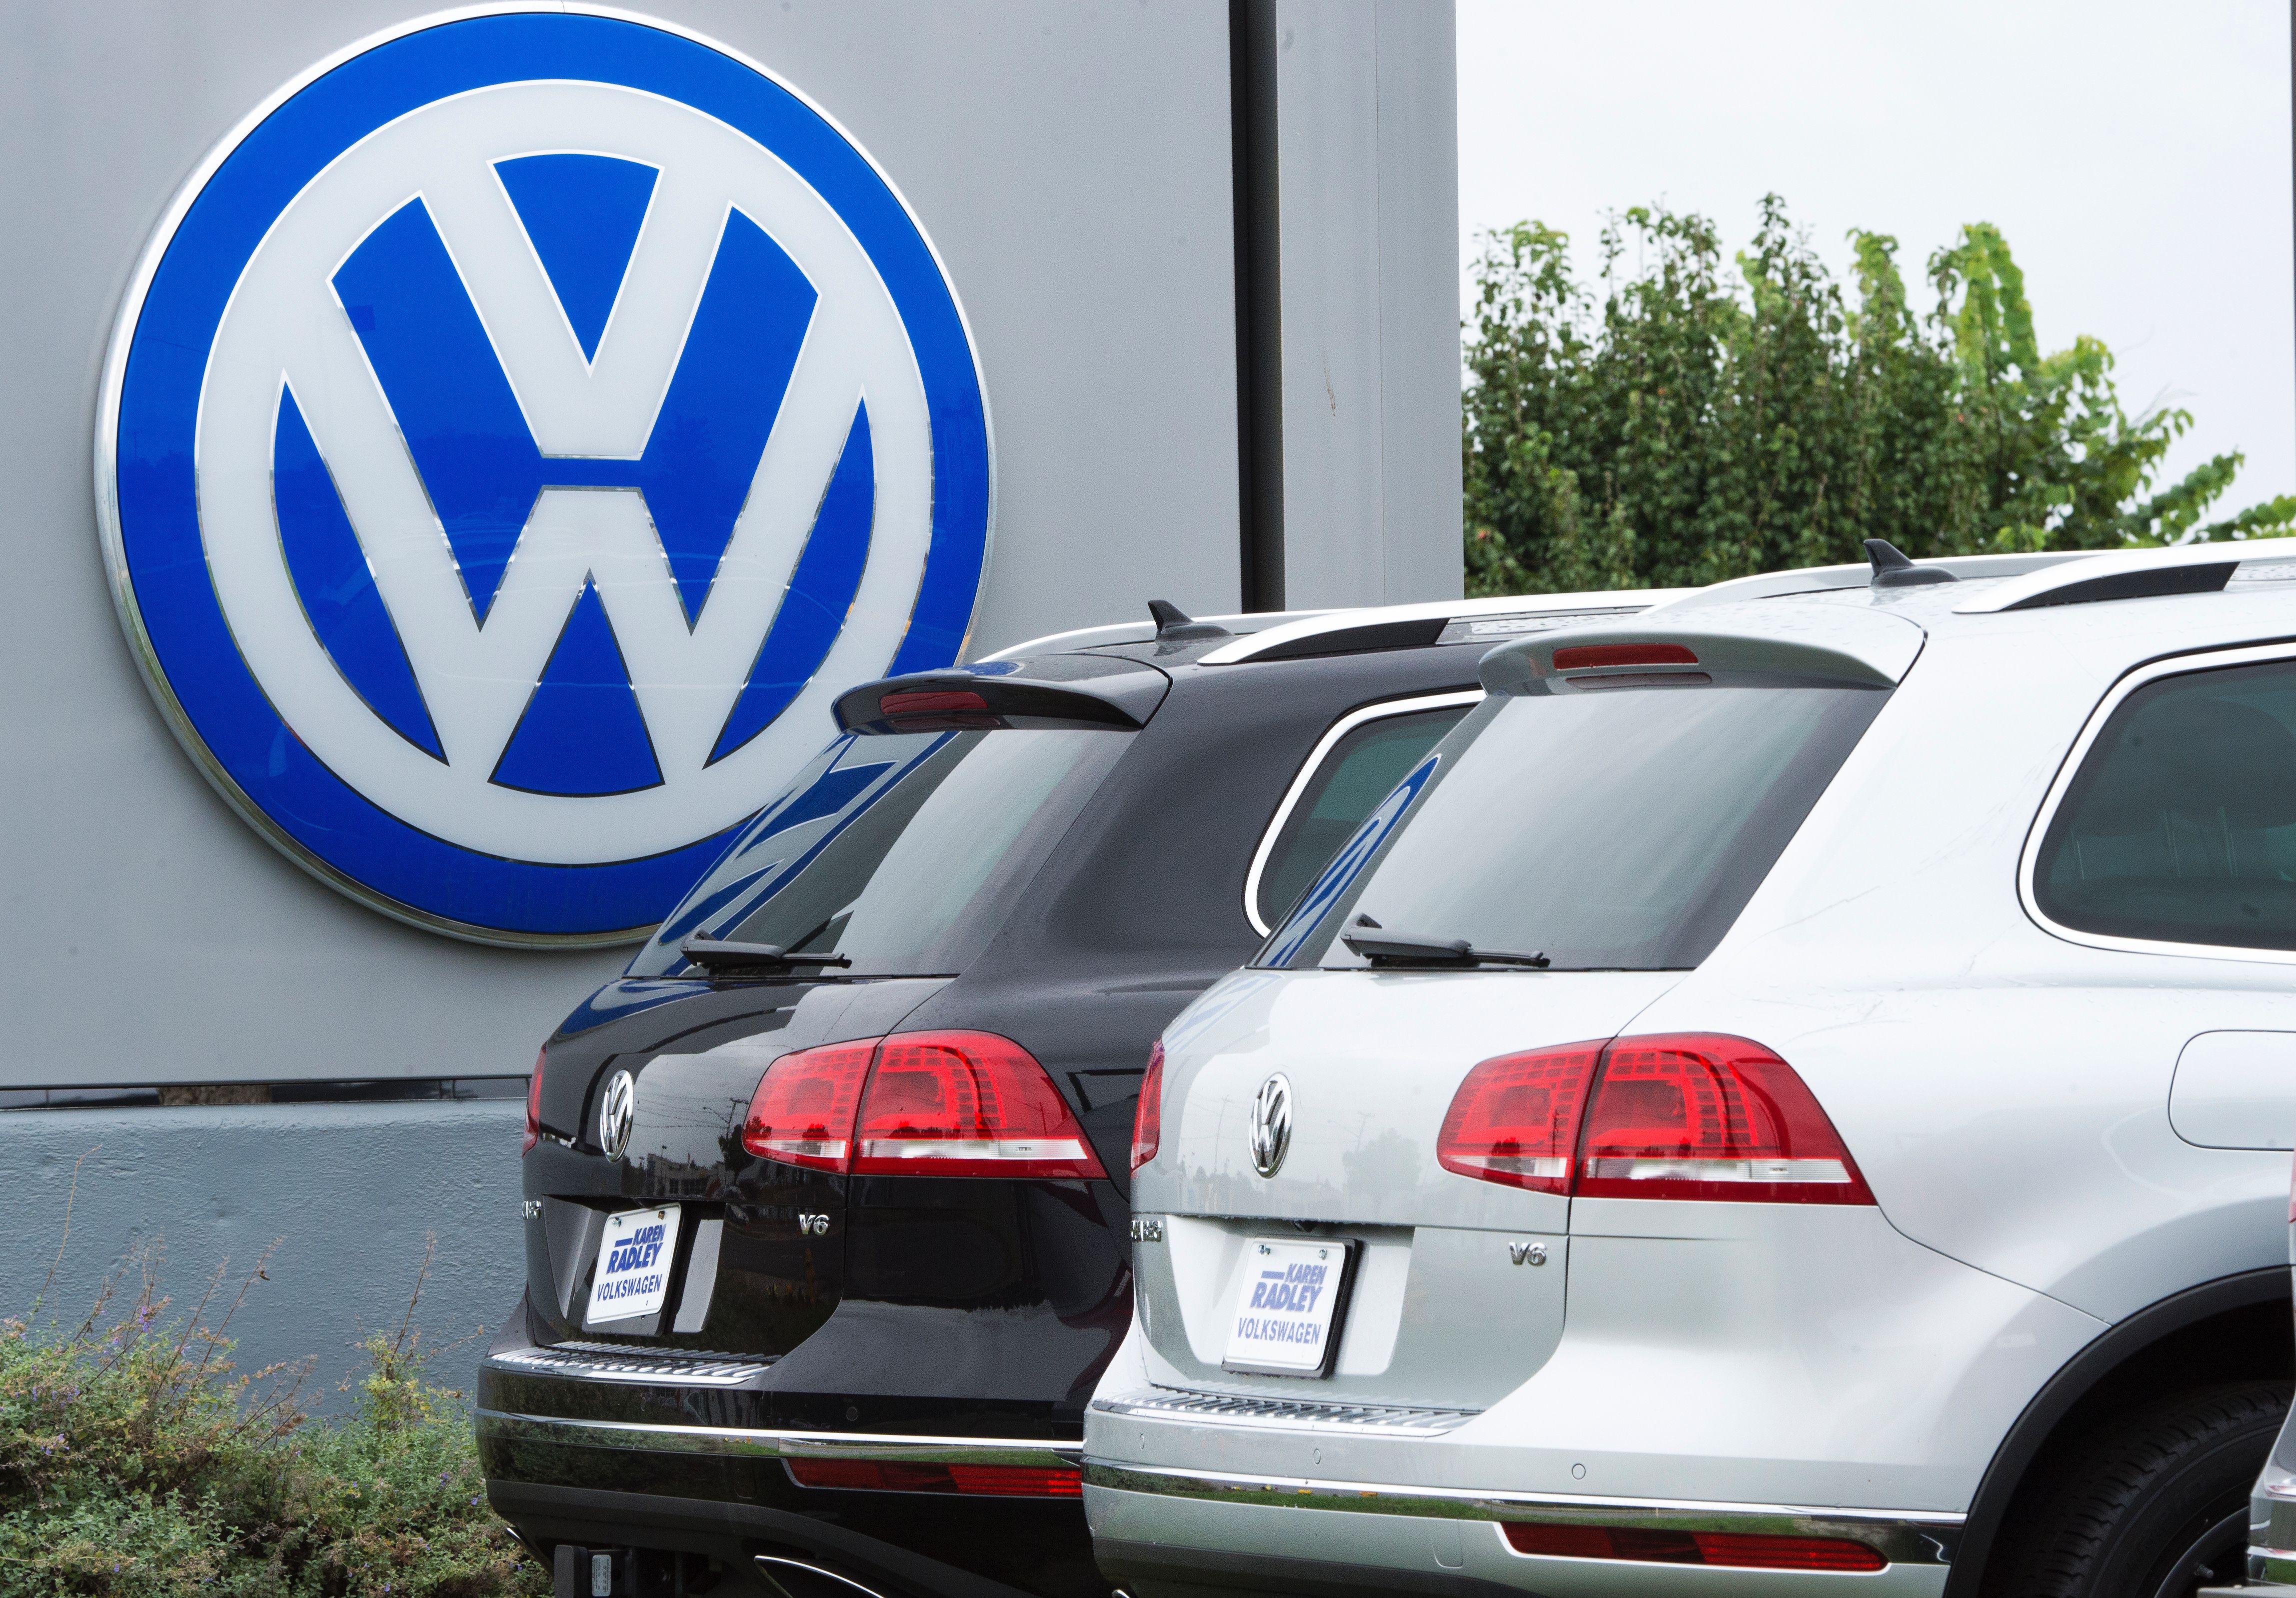 The logo of German car maker Volkswagen (VW) is seen at Northern Virginia dealer in Woodbridge, Virginia on September 29, 2015. Wall Street stocks dropped for the week despite some improving US data as worries ranging from a slowing Chinese economy to the Volkswagen emissions scandal dampened sentiment. Volkswagen came under pressure after reports surfaced concerning the manipulation of values of emission in VW vehicles equipped with diesel engines. AFP PHOTO/PAUL J. RICHARDS / AFP / PAUL J. RICHARDS (Photo credit should read PAUL J. RICHARDS/AFP/Getty Images)